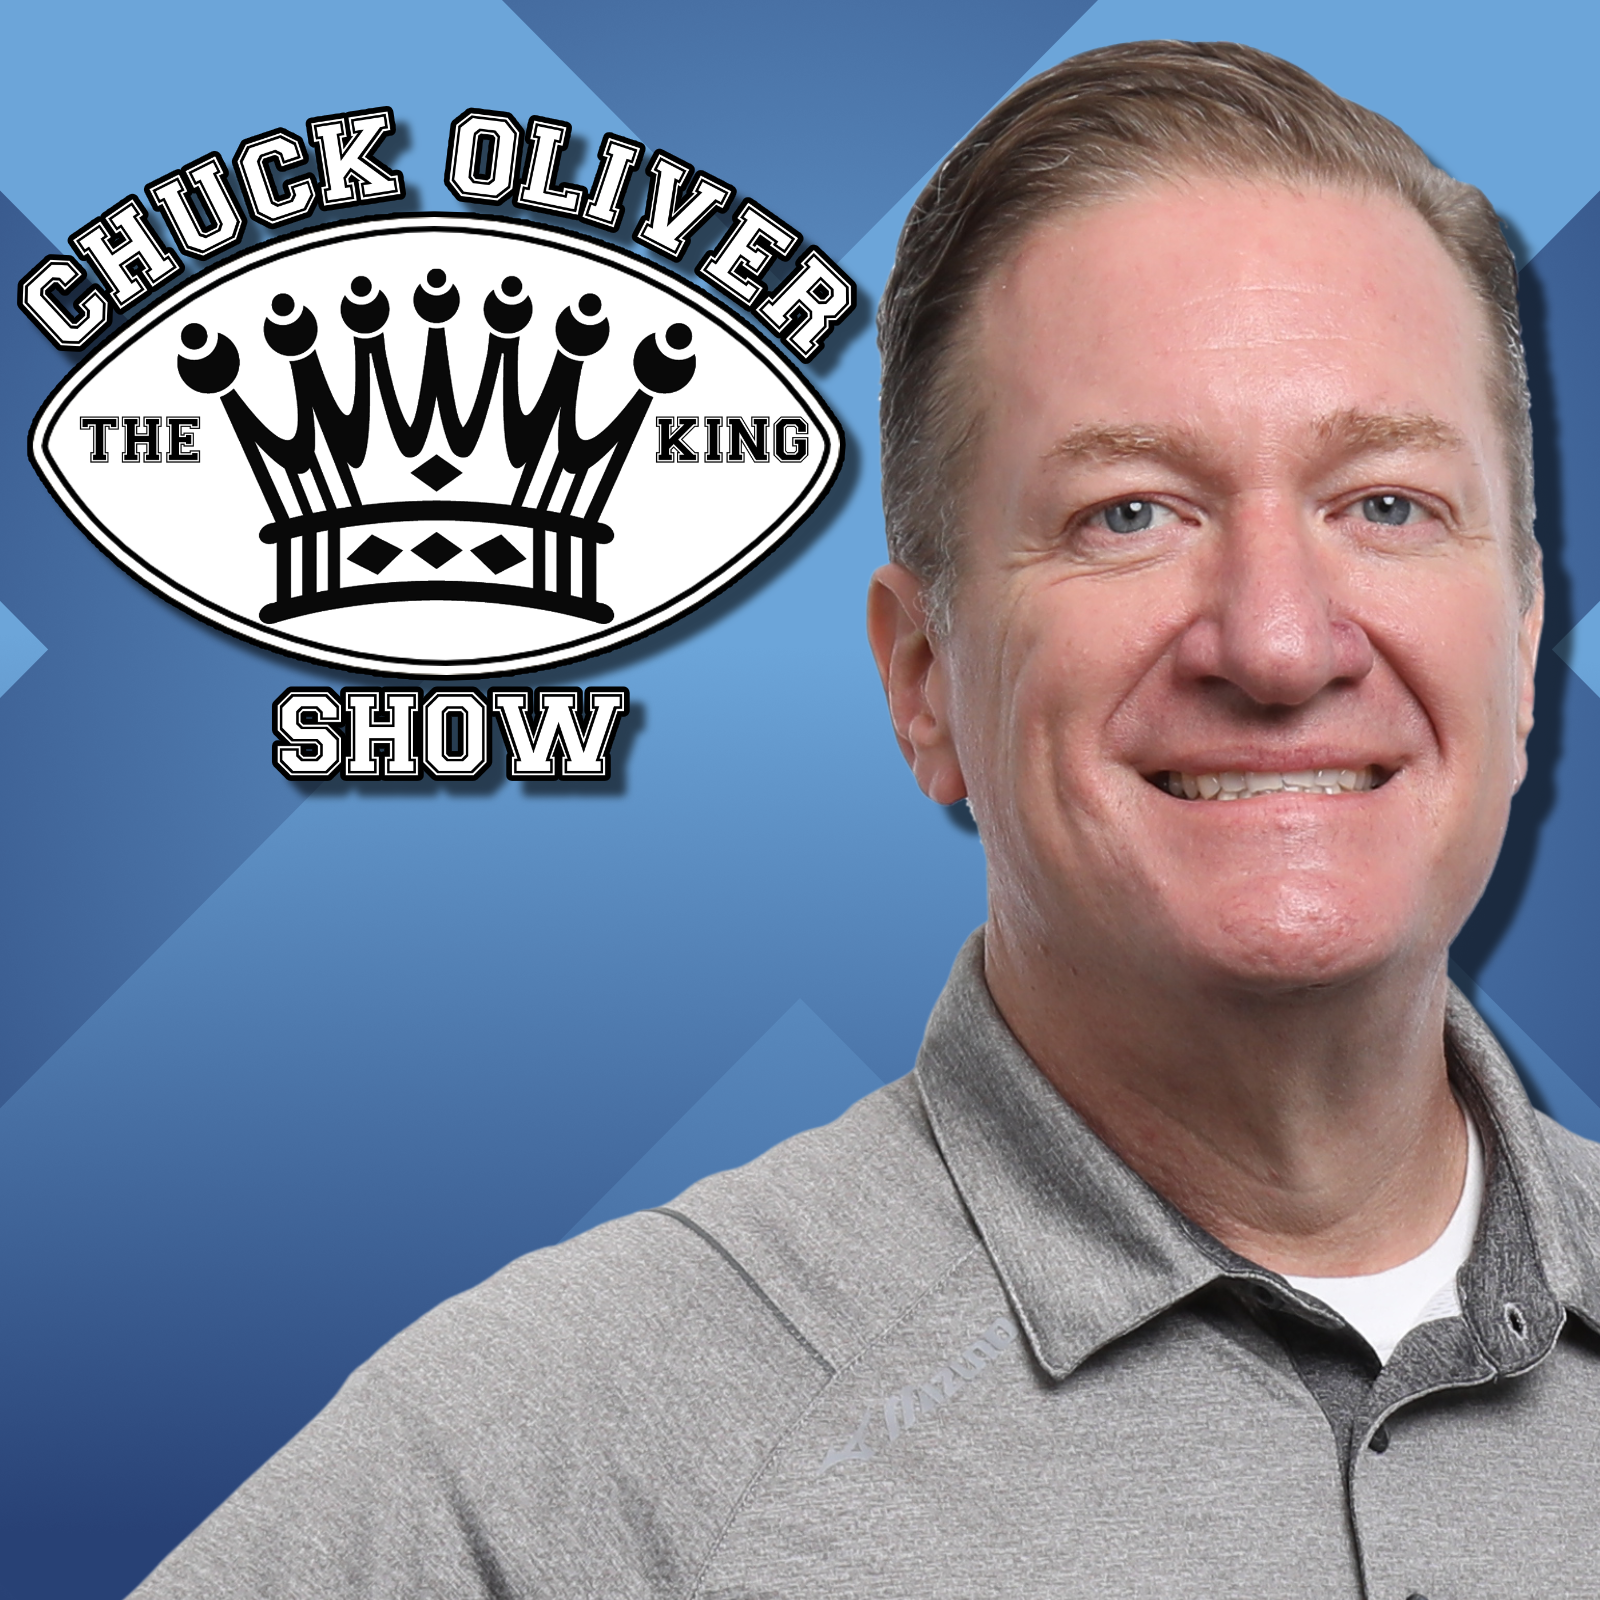 CHUCK OLIVER SHOW 5-24 FRIDAY HOUR 1